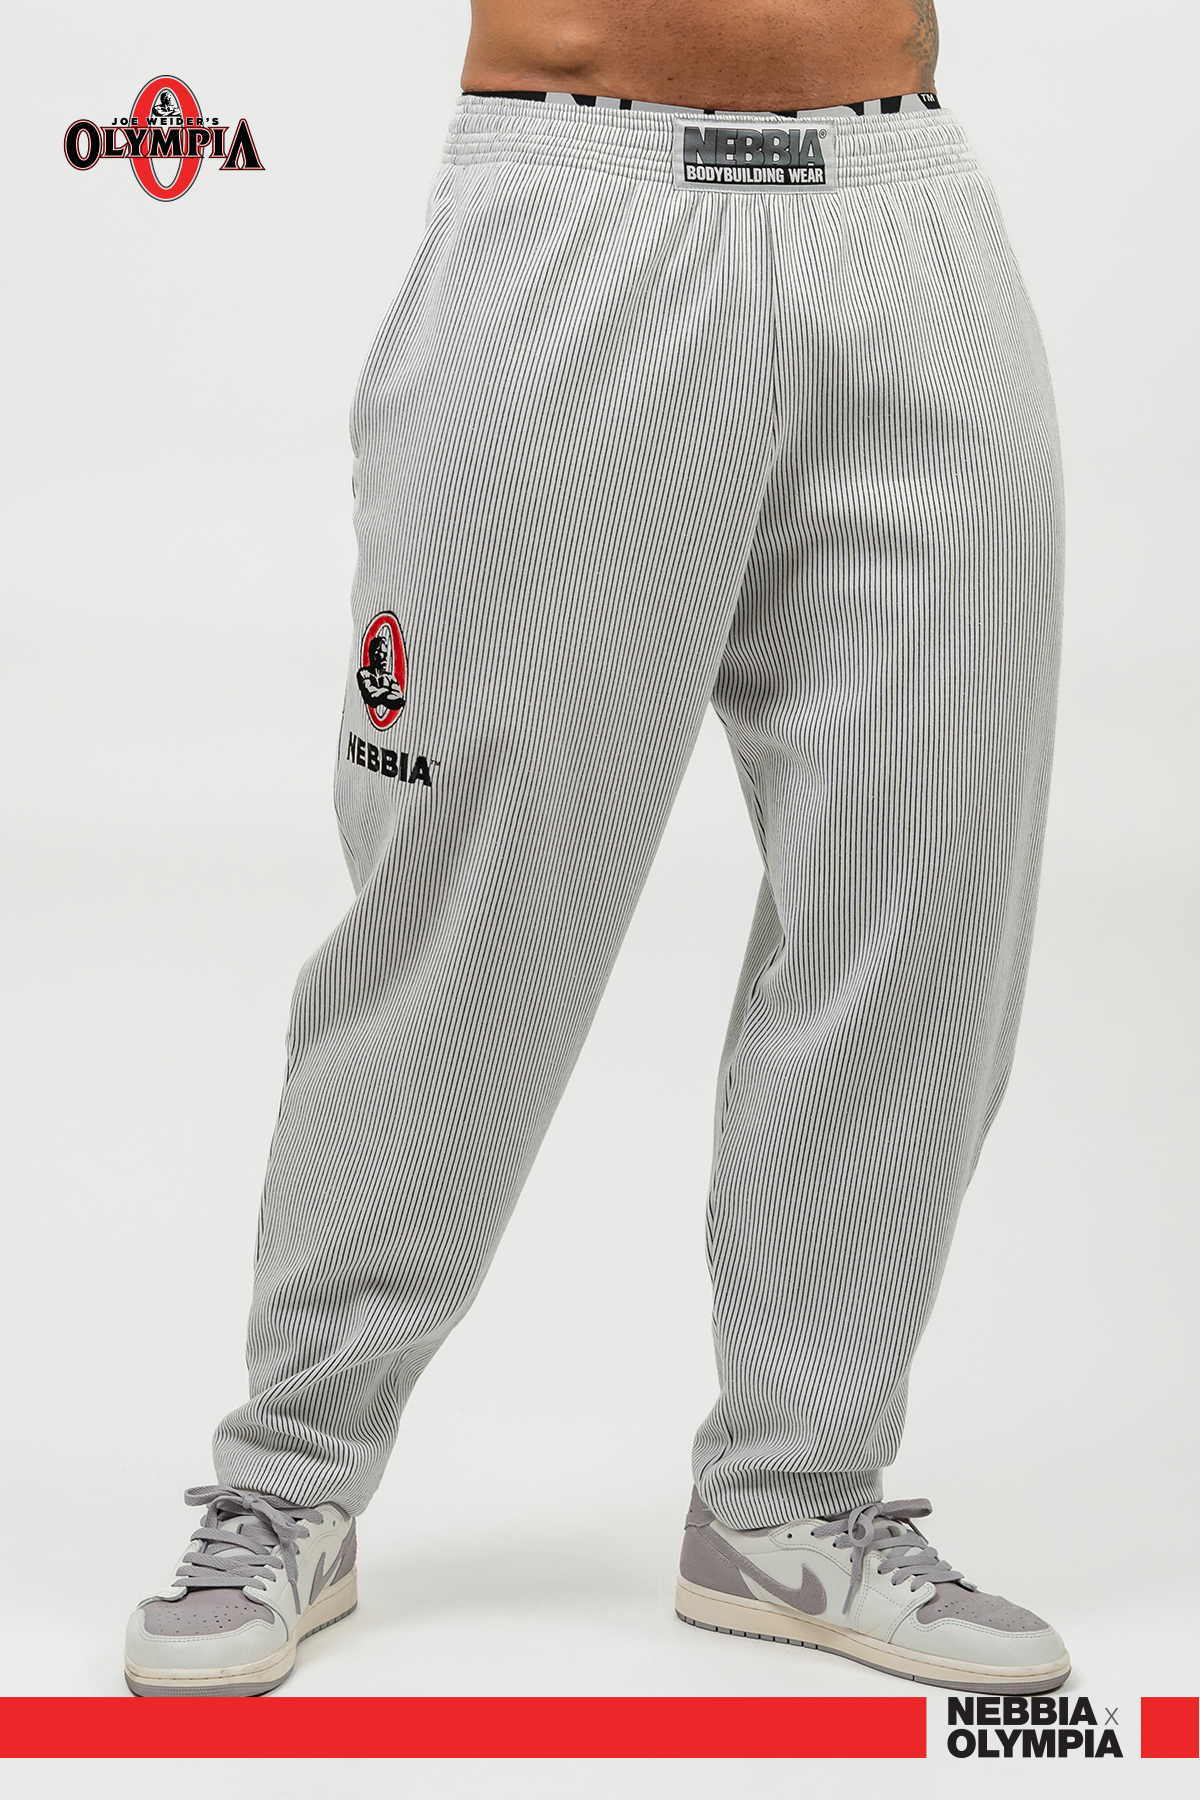 Men's Baggy Sweatpants with Pockets, Oldschool Loose Fit Gym Muscle Pants  Gift For Bodybuilders